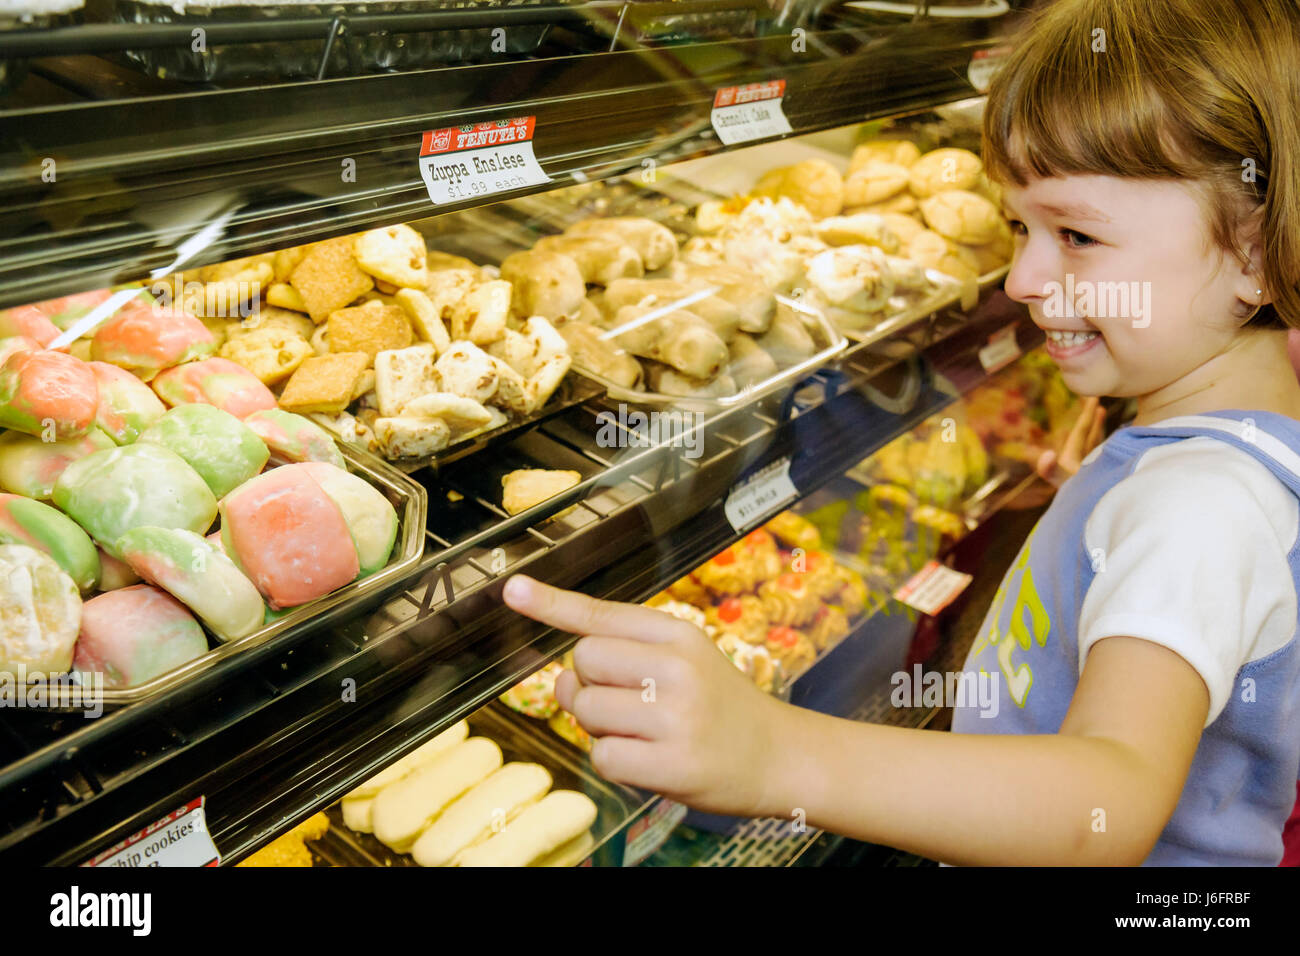 Kenosha Wisconsin,Tenuta's Delicatessen Liquors and Wines,girl girls,youngster youngsters youth youths female kid kids child children,tray,food,bakery Stock Photo